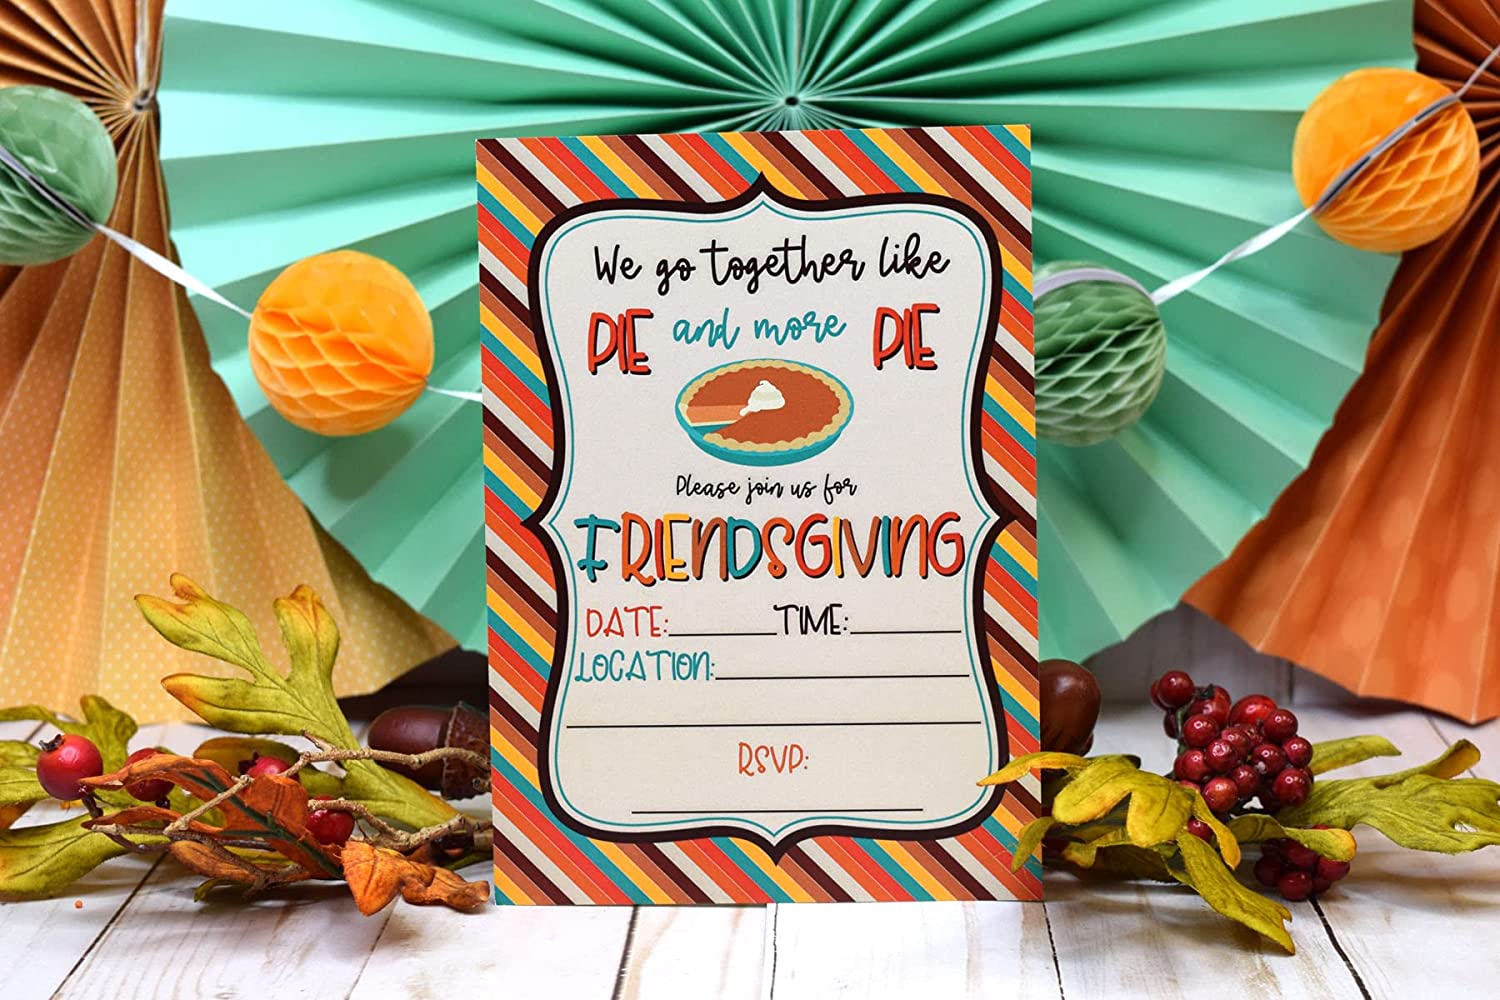 We Go Together Like Pie Thanksgiving Party Invitations – Amanda Creation